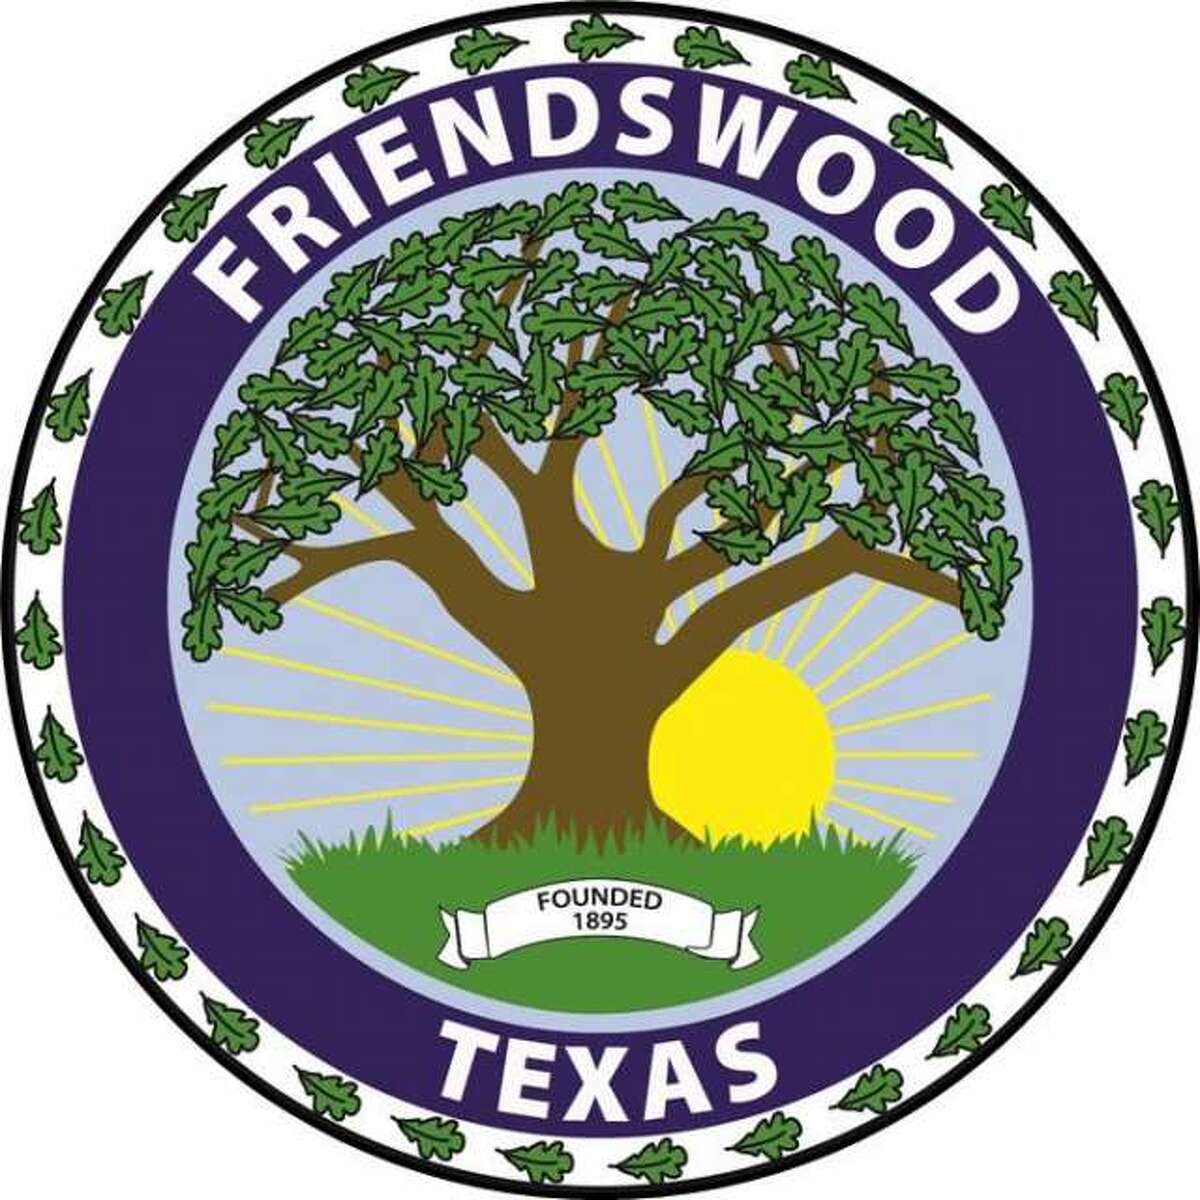 Friendswood City Council is set to vote on a proposed tax rate of of 48.73 cents per $100 valuation on Sept. 12, which would be unchanged from the current rate. But rising property values will mean that many homeowners will pay more in city property taxes.